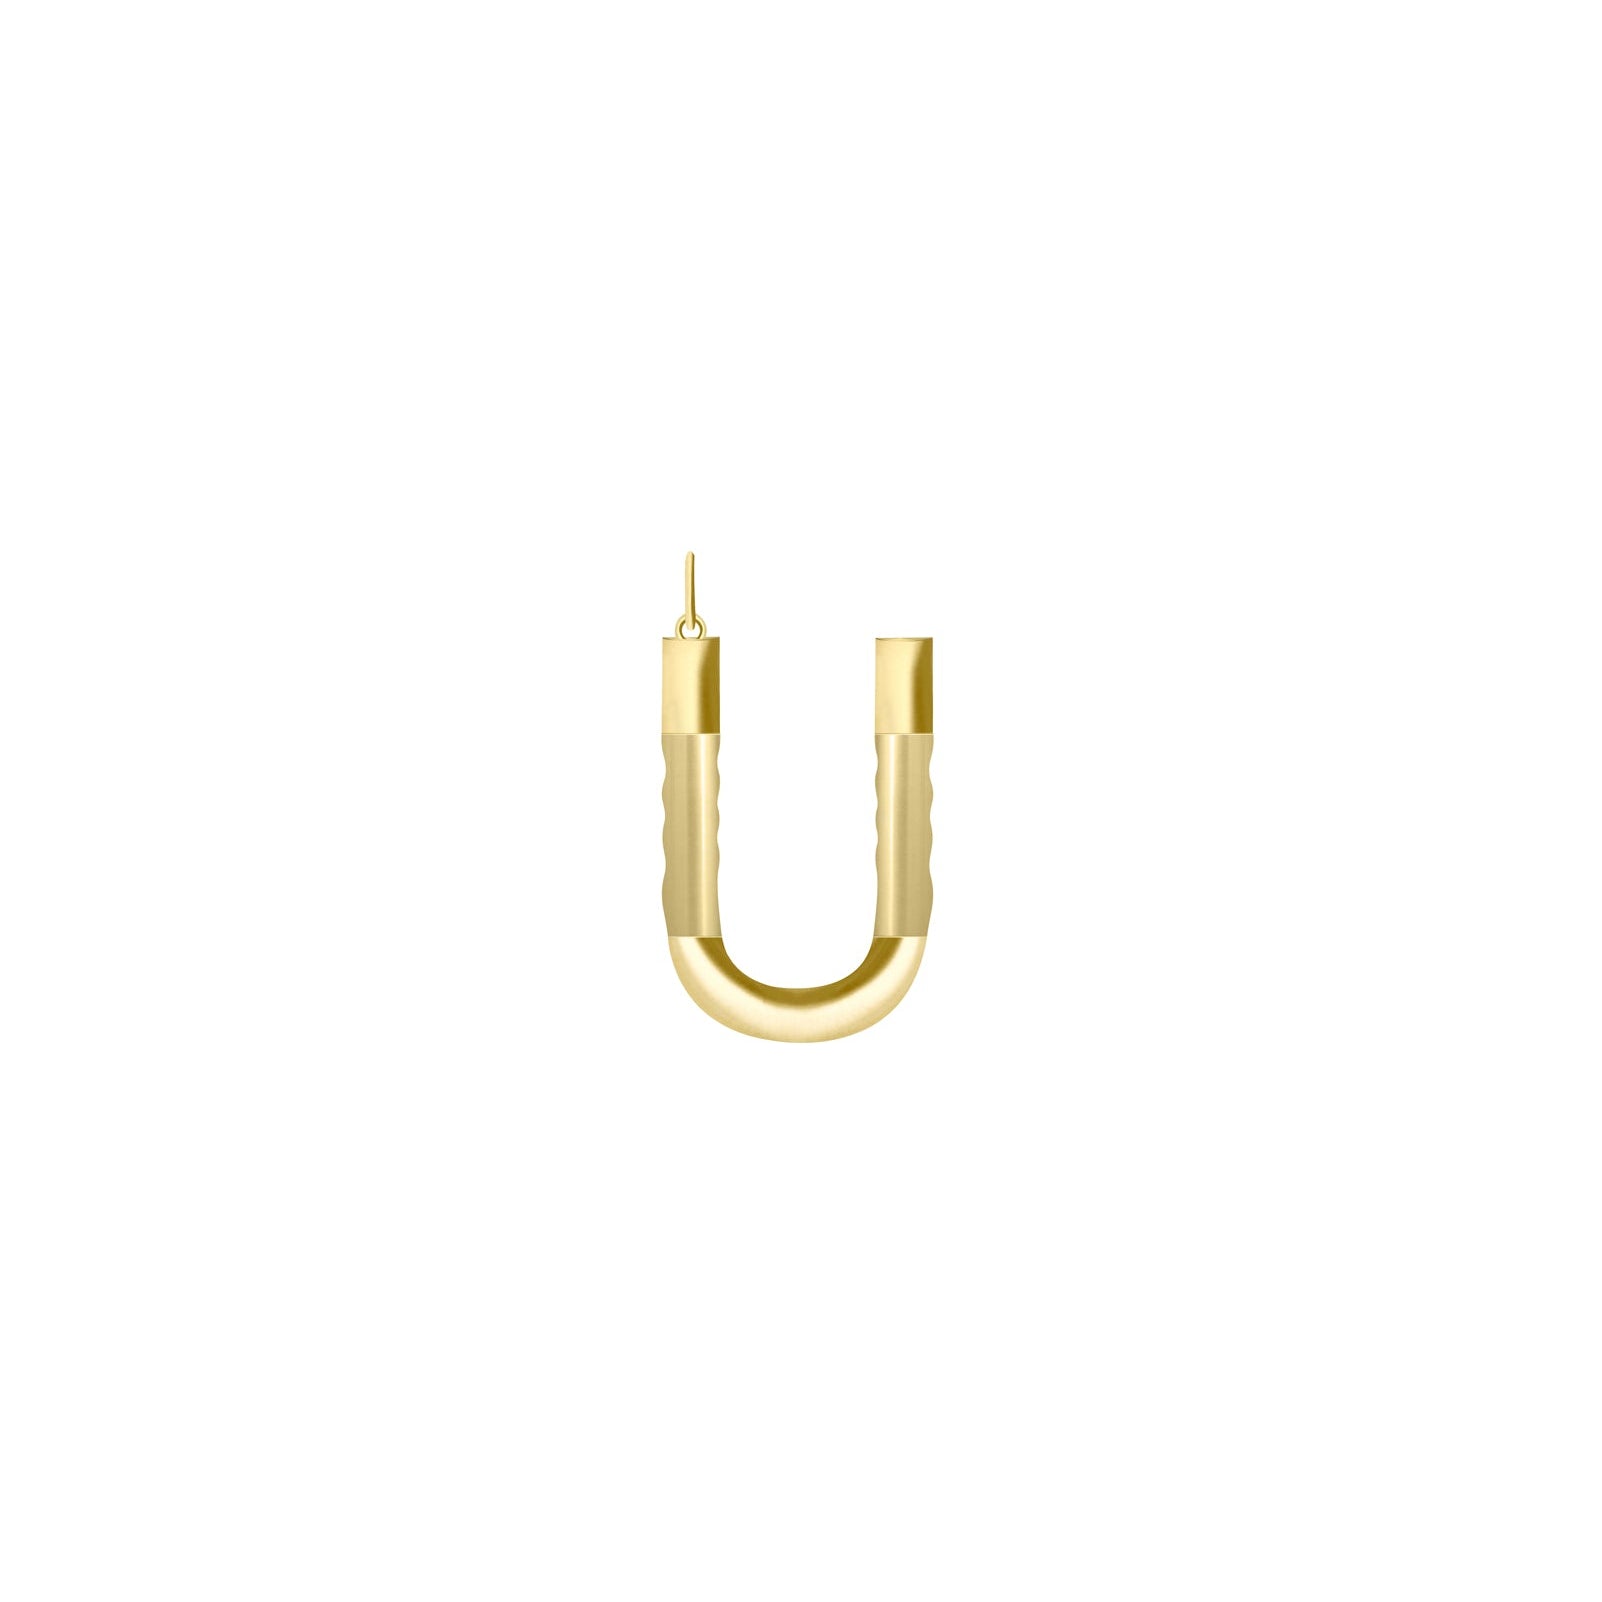 XL Solid Initial with Chain